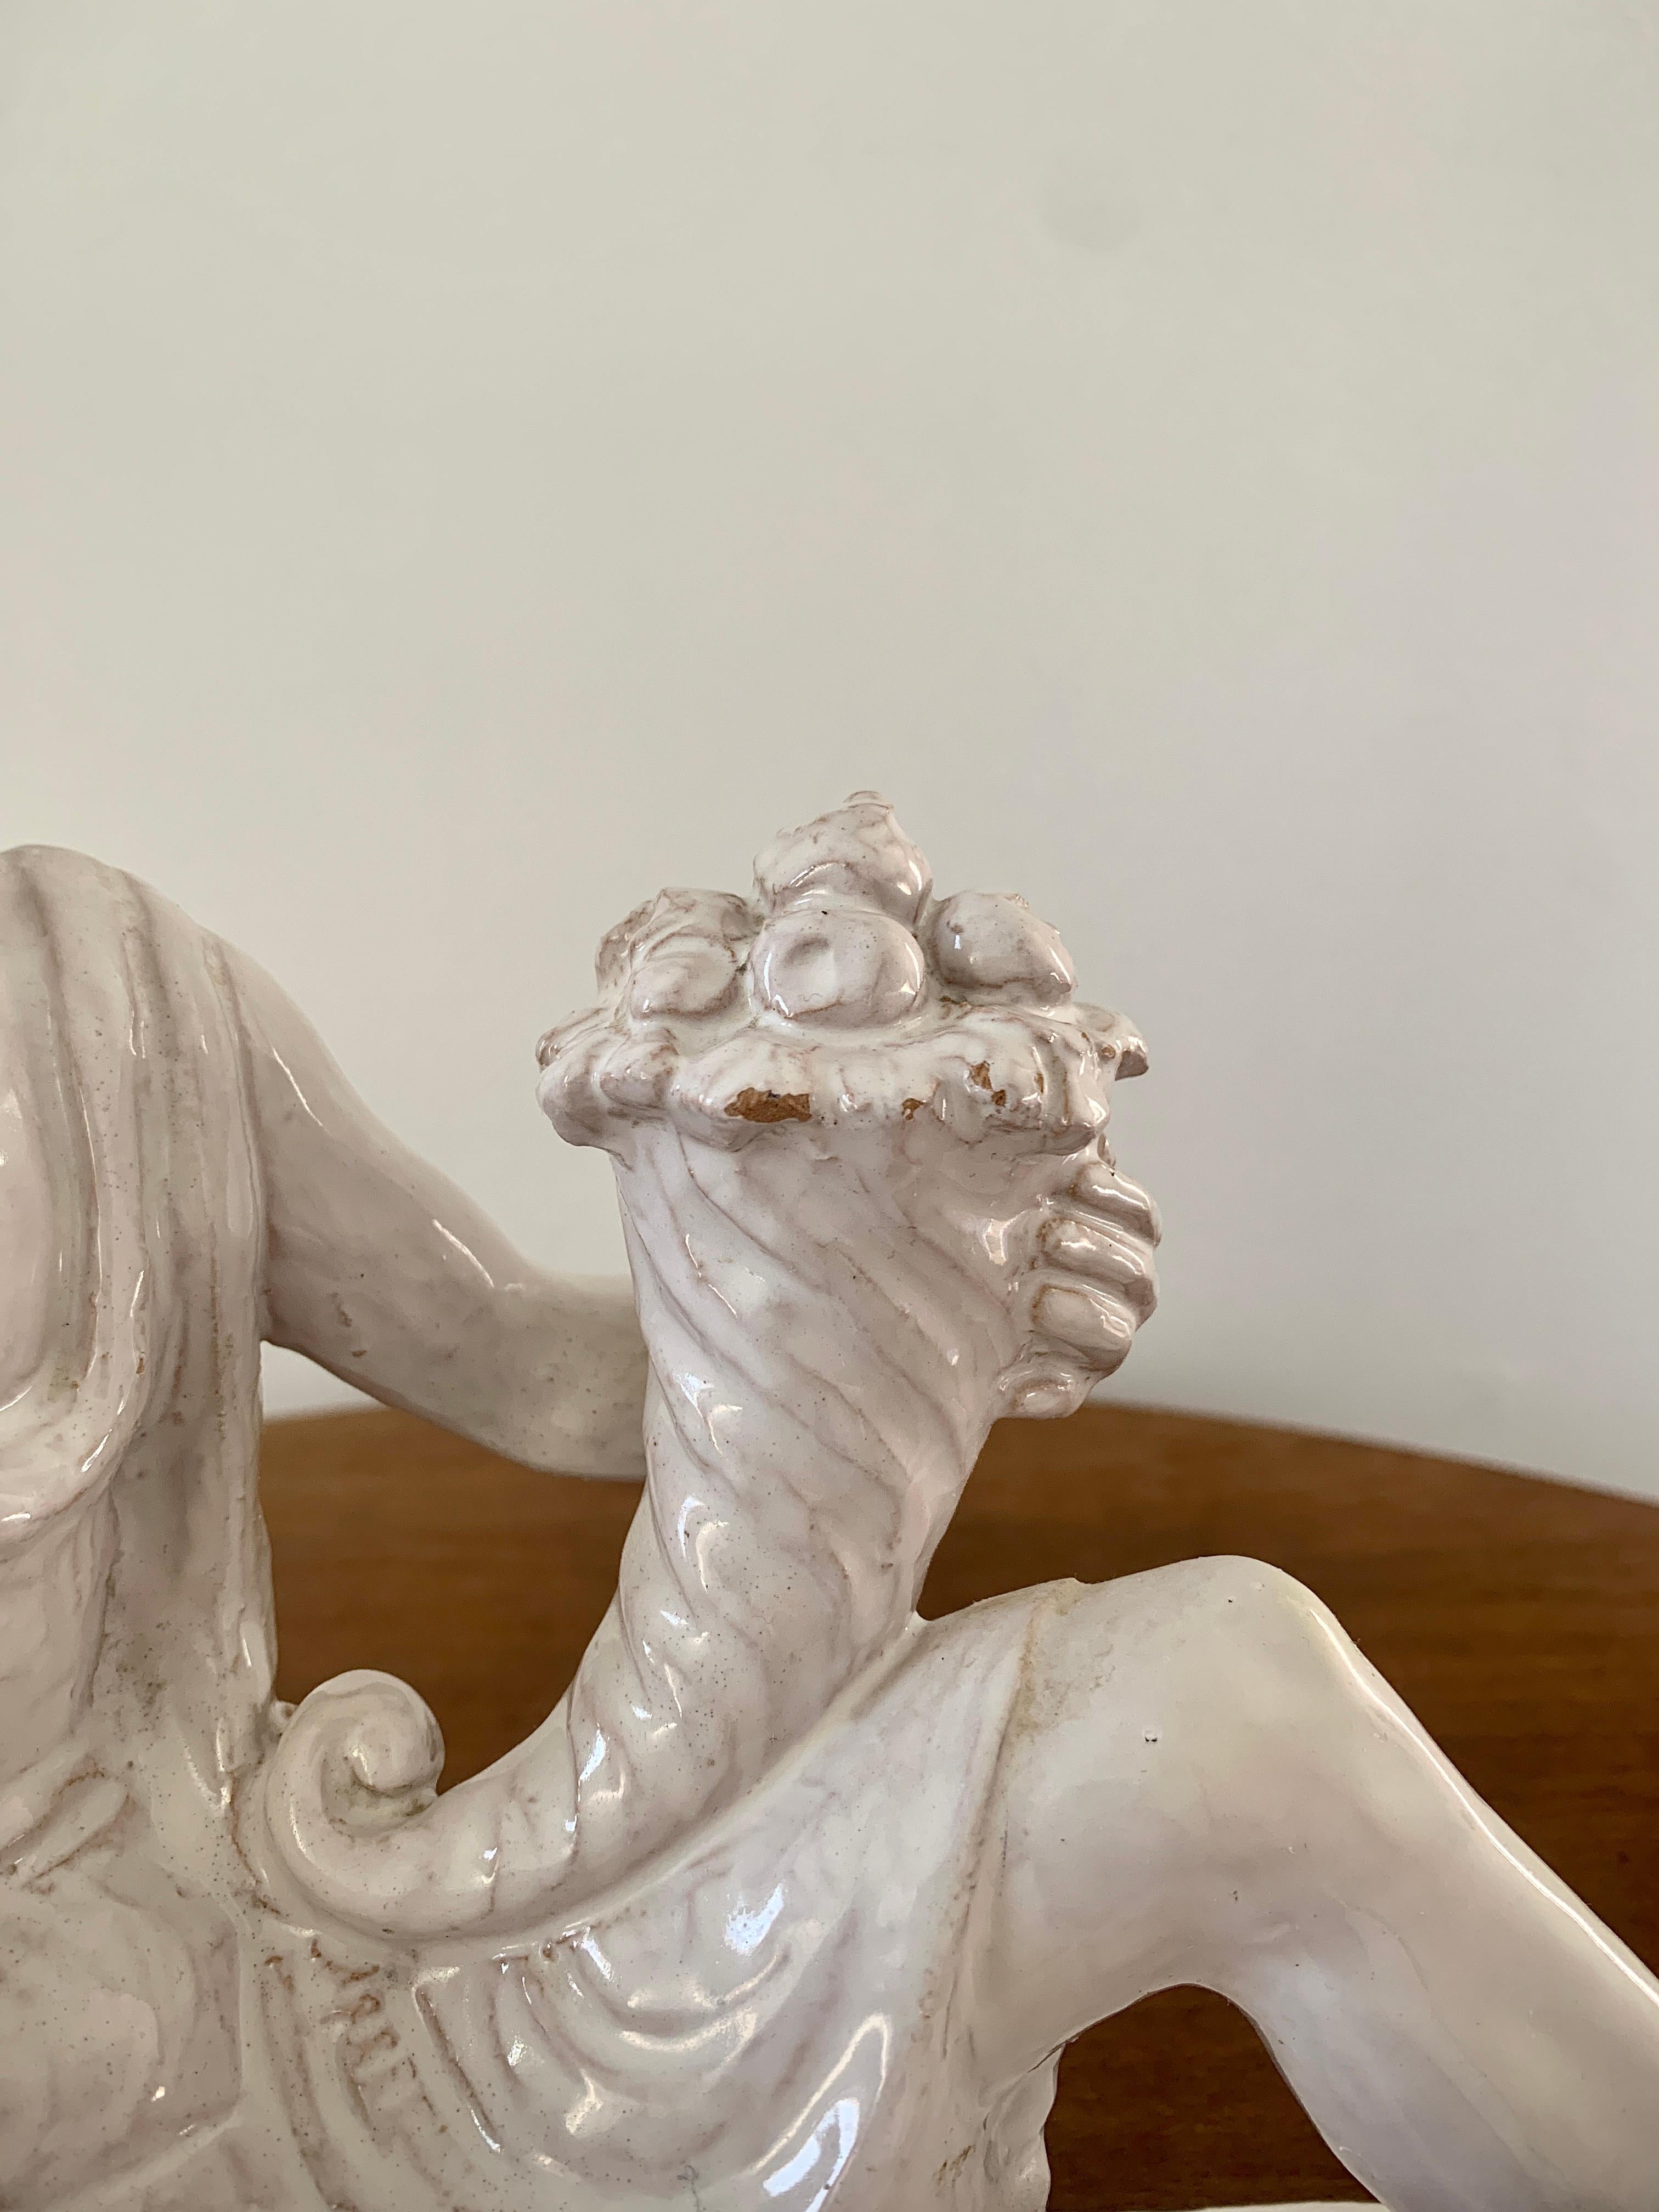 Mid-20th Century Italian Neoclassical White Porcelain Reclining Man with Cornucopia Sculpture For Sale